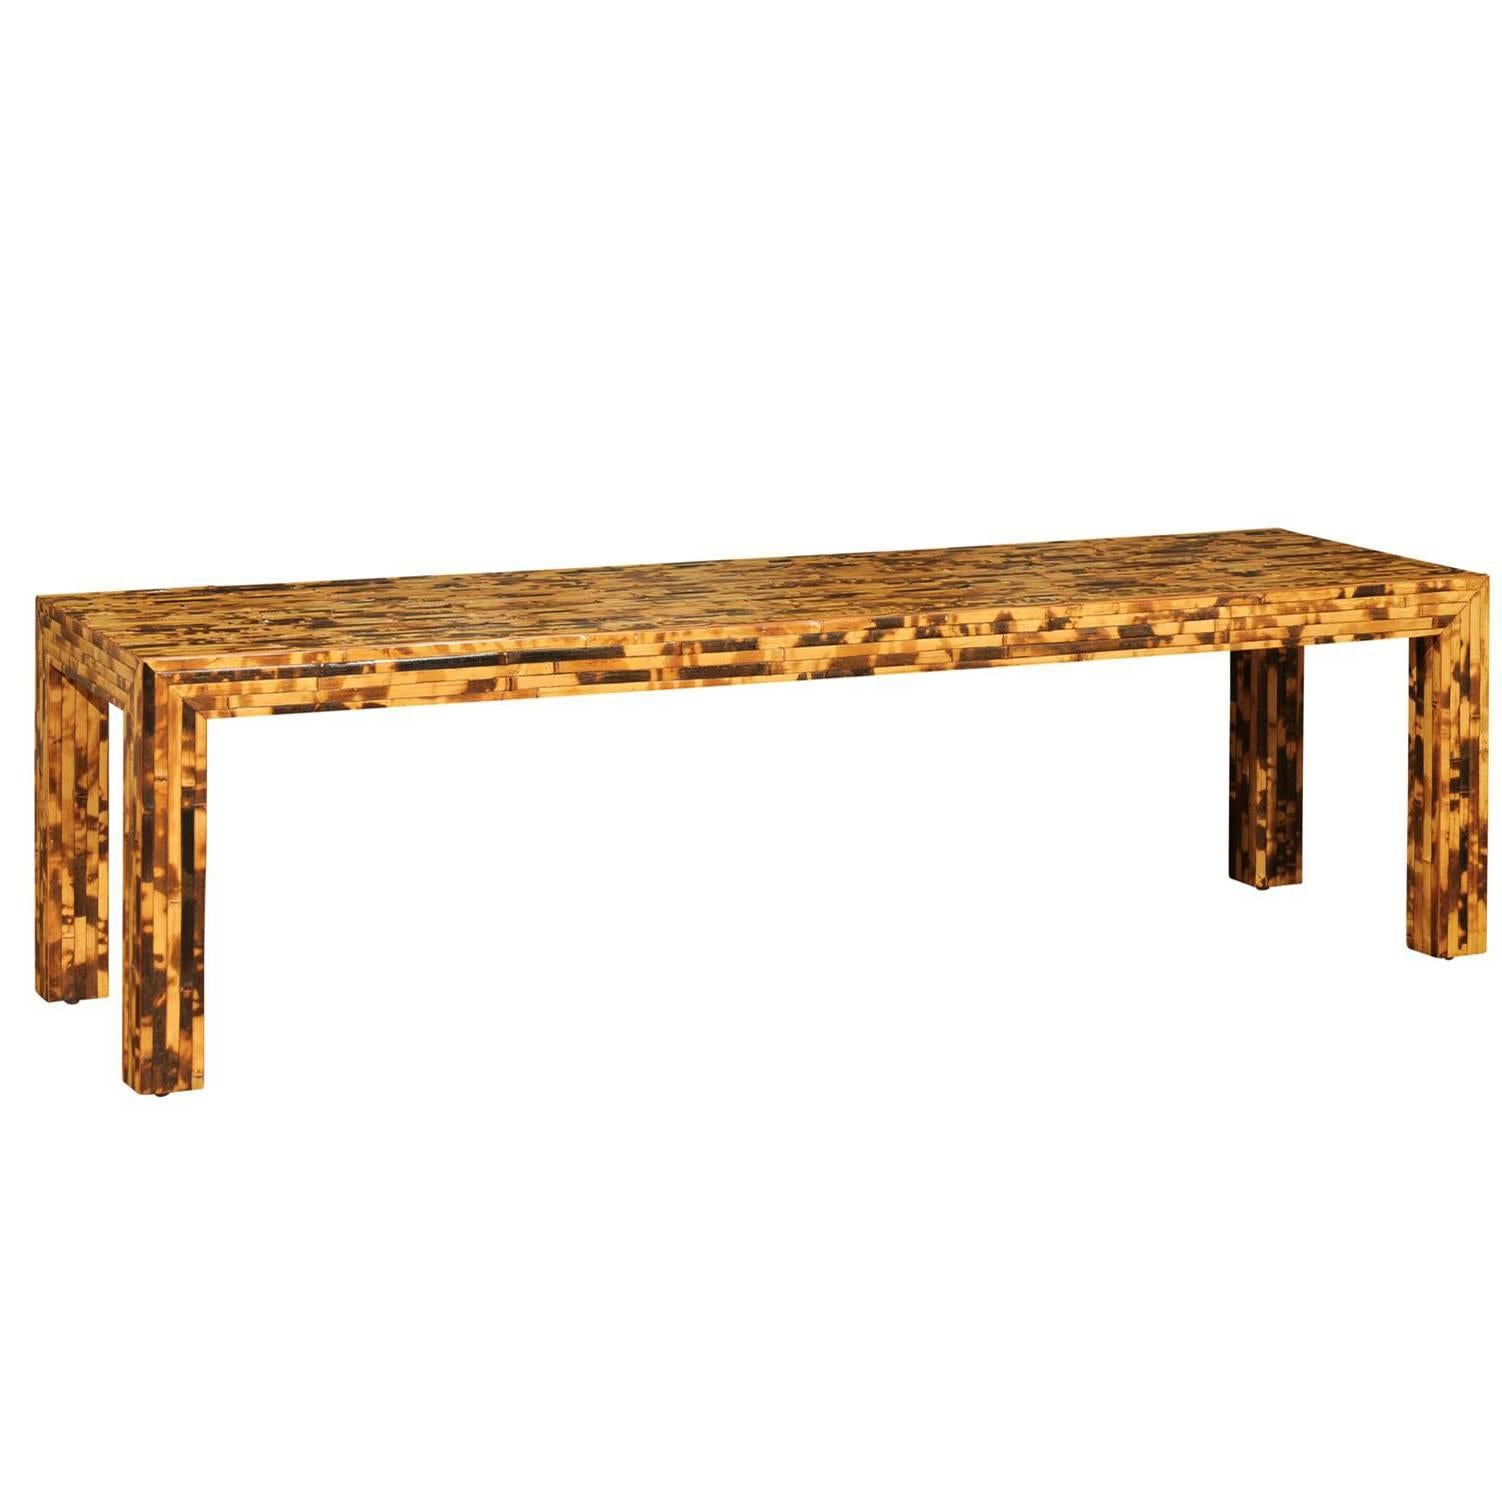 Handsome Vintage Bamboo Tortoise Shell Style Coffee Table or Bench